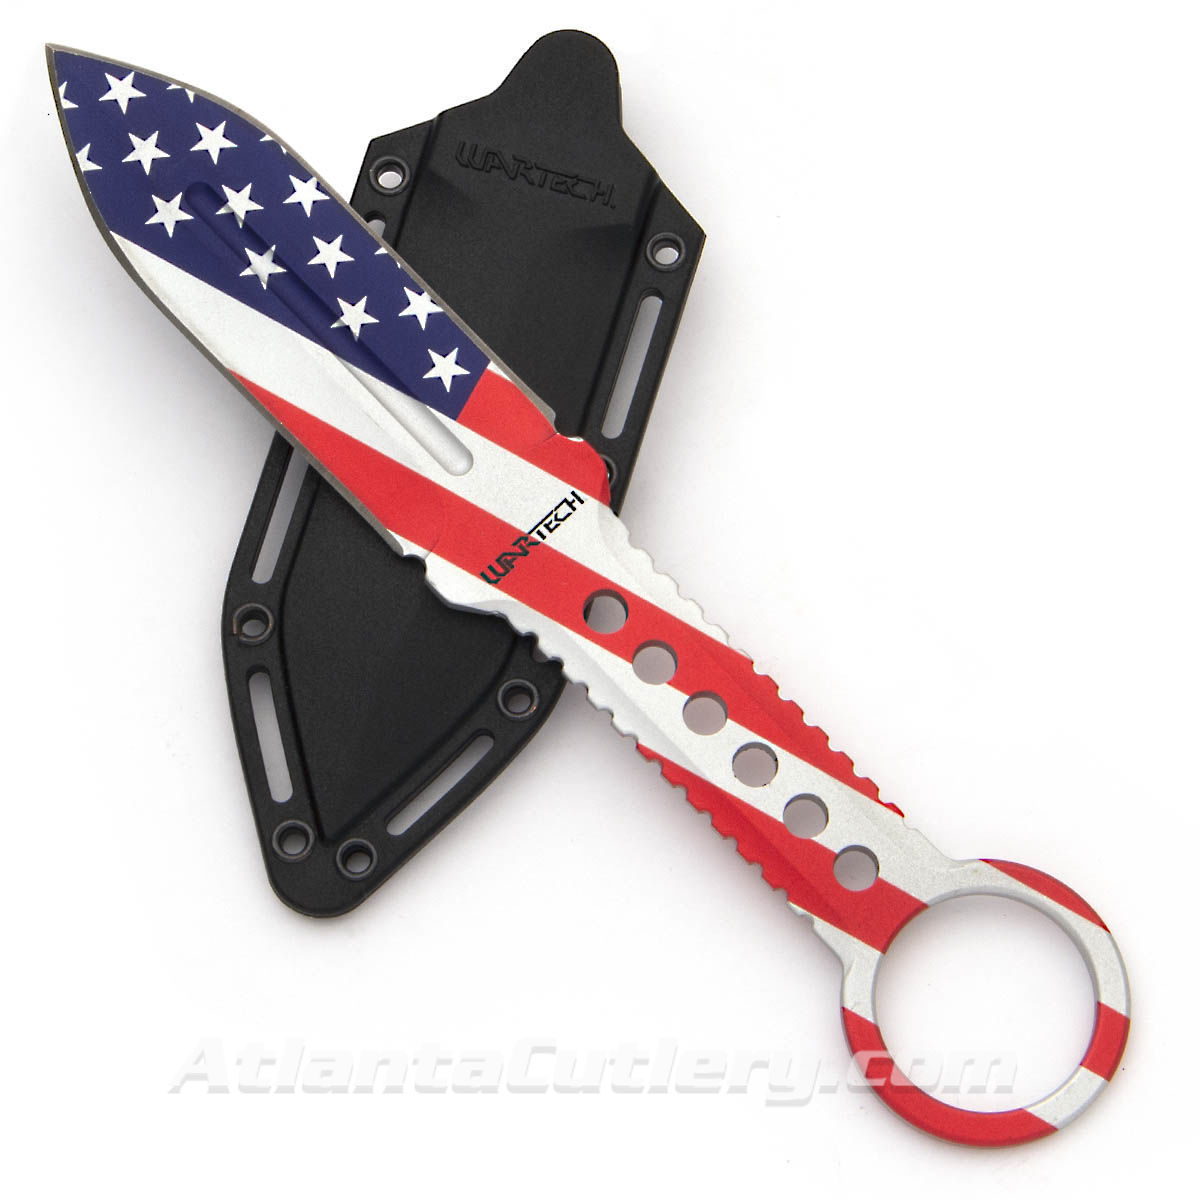 Red, White and Blue Wartech Old Glory Boot or Belt Dagger includes Kydex sheath